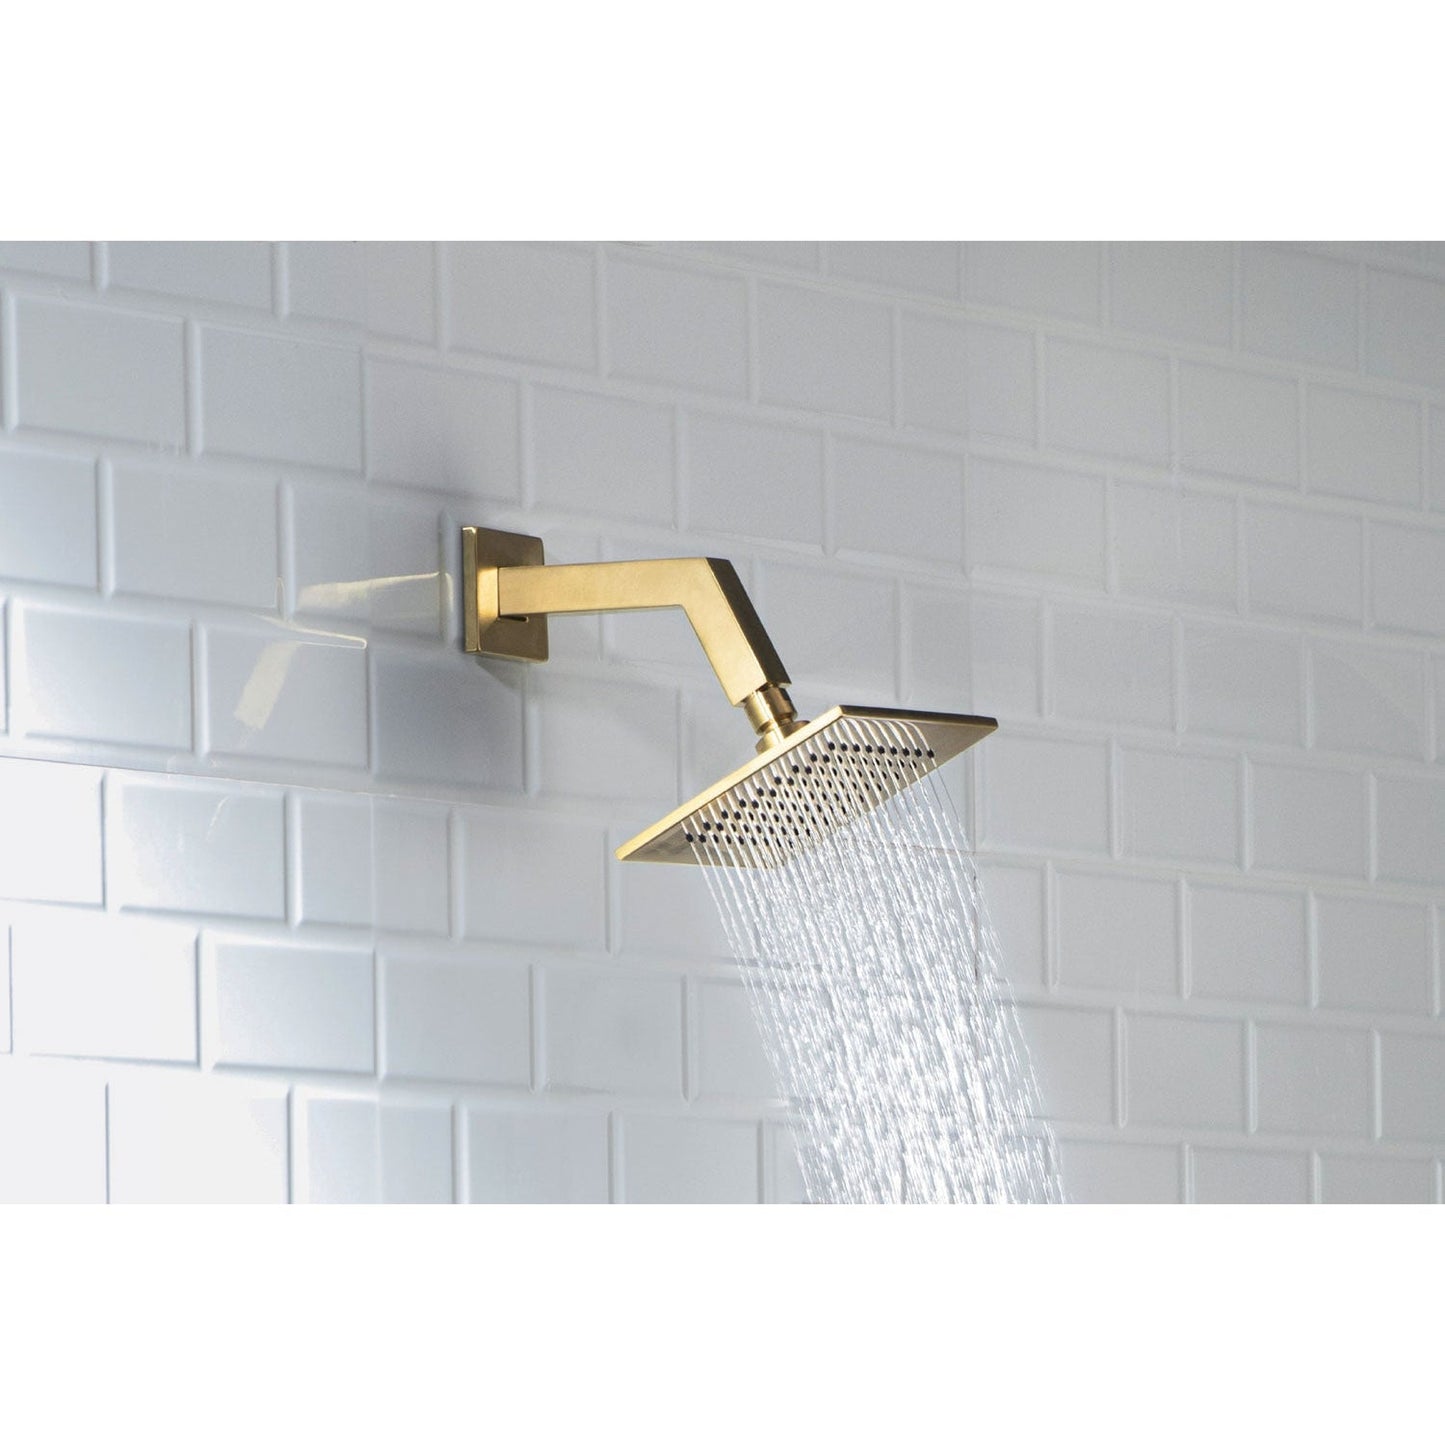 Isenberg Universal Fixtures 6" Single Function Square Brushed Nickel PVD Solid Brass Rain Shower Head With 8" Wall Mounted Shower Arm